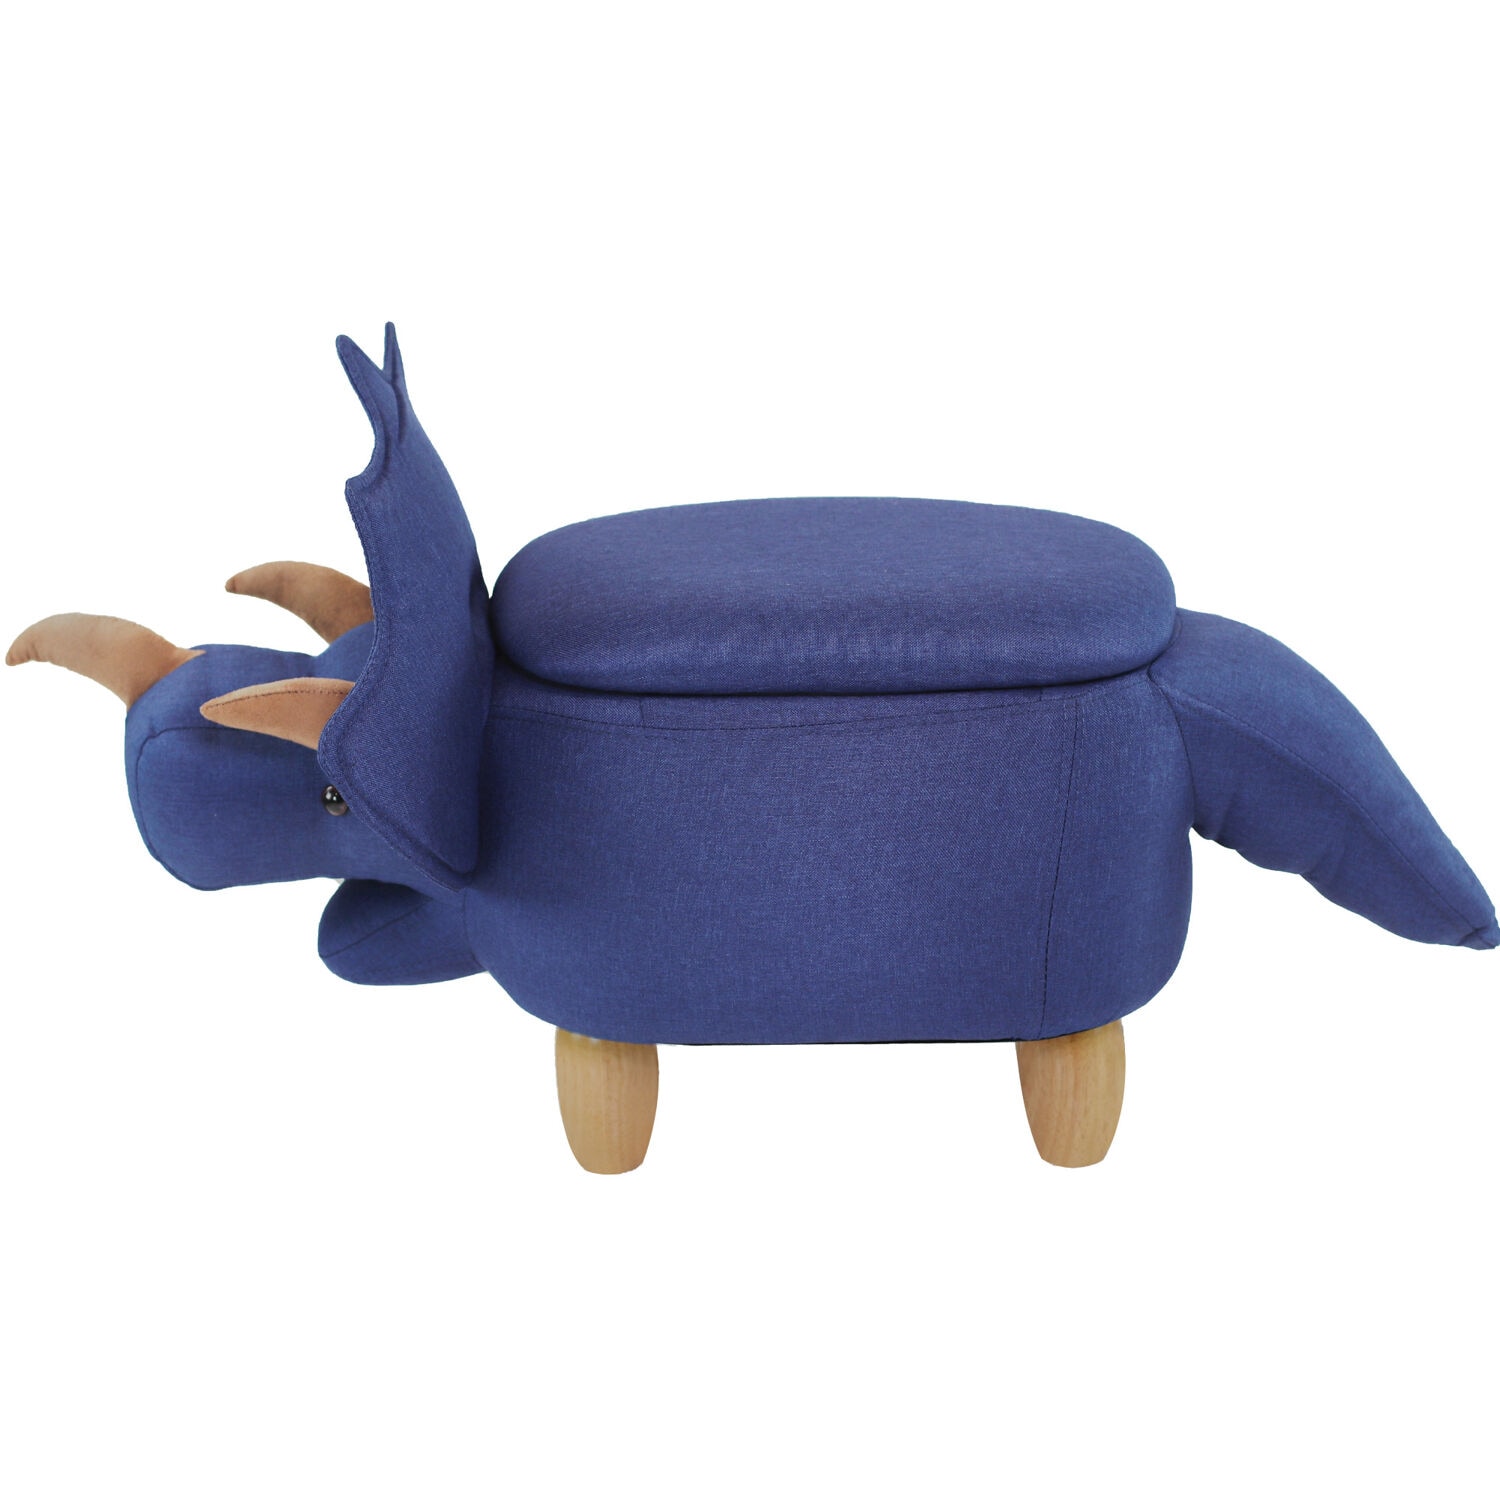 Critter Sitters Denim Blue Animal-Shaped Kids Accent Chair with